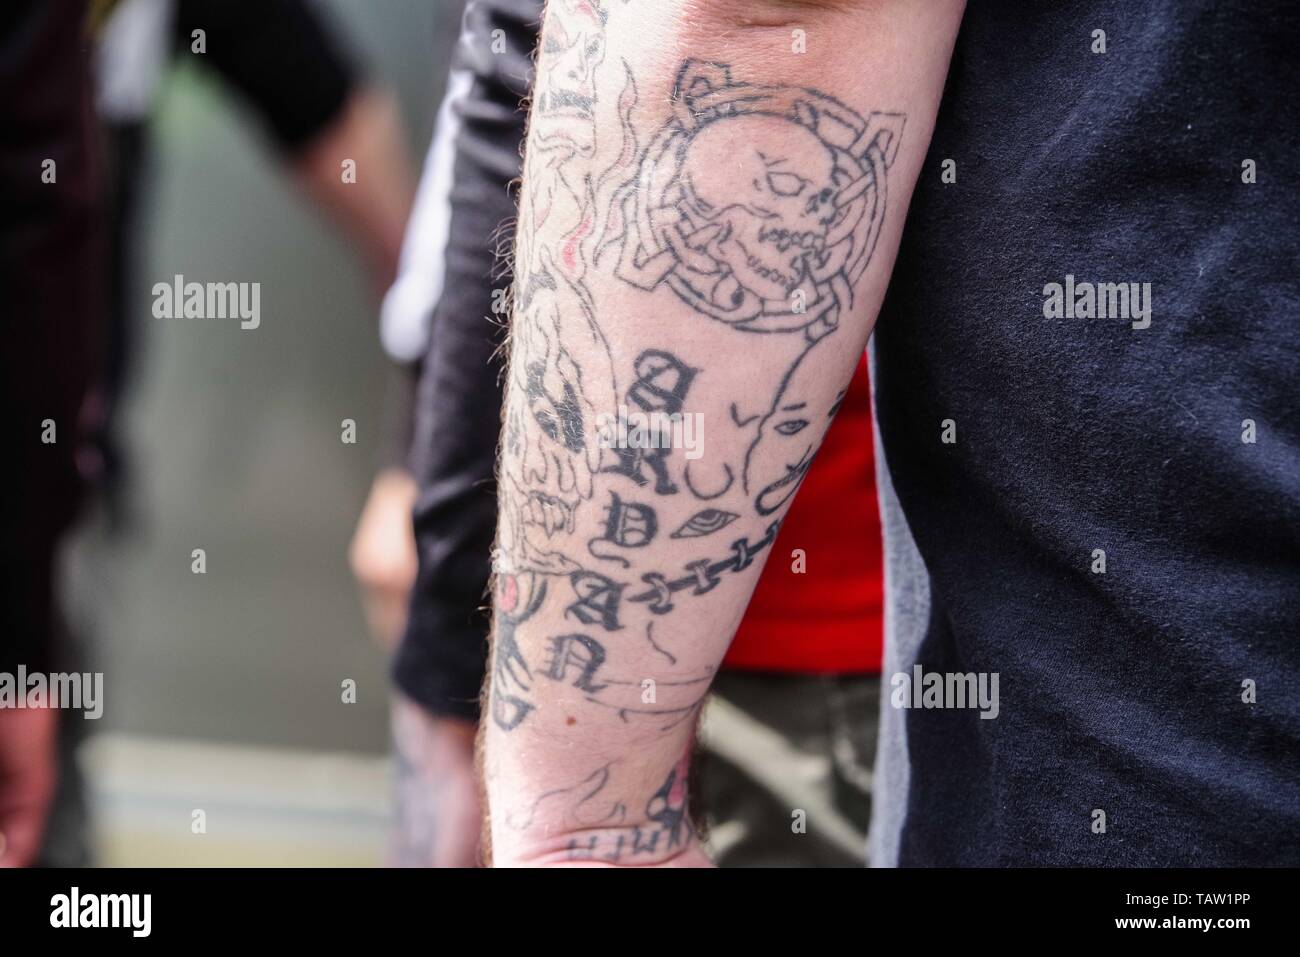 Dortmund, Nordrhein Westfalen, Germany. 25th May, 2019. A neonazi in Dortmund, Germany with an ''Aryan'' tattoo which could signify his membership with the prison gang. Prior to the European Elections, the neonazi party Die Rechte (The Right) organized a rally in the German city of Dortmund to promote their candidate, the incarcerated Holocaust denier Ursula Haverbeck. The demonstration and march were organized by prominent local political figure and neonazi activist Michael Brueck (Michael BrÃ¼ck) who enlisted the help of not only German neonazis, but also assistance from Russian, Bulgarian Stock Photo